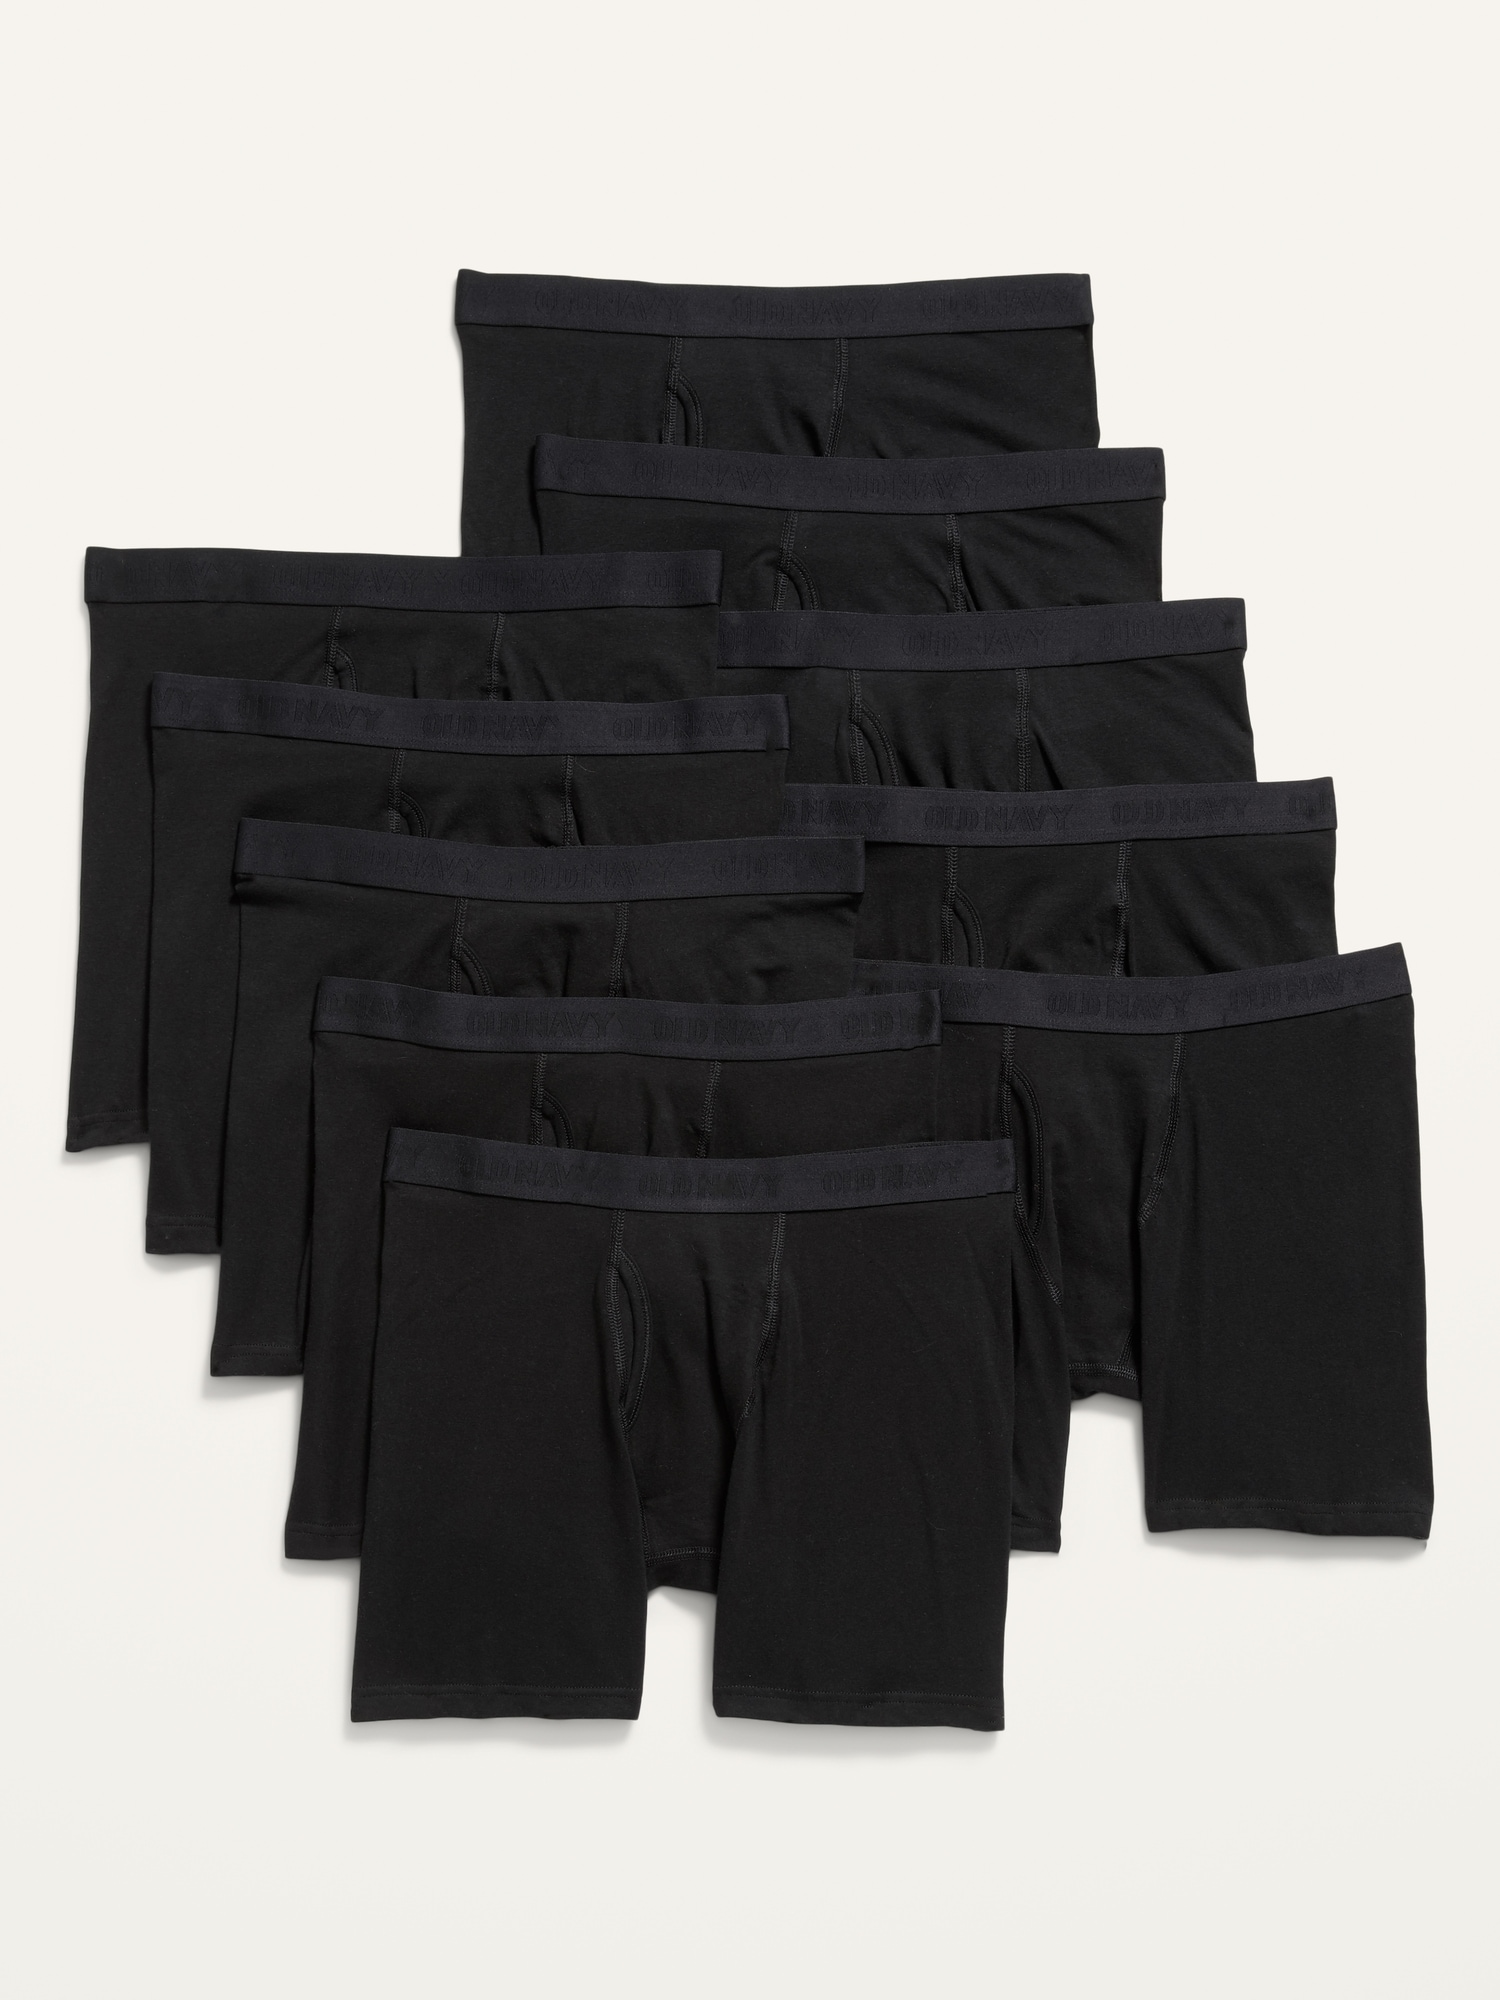 U.S. G.I. Stainless Briefs, 6 pack